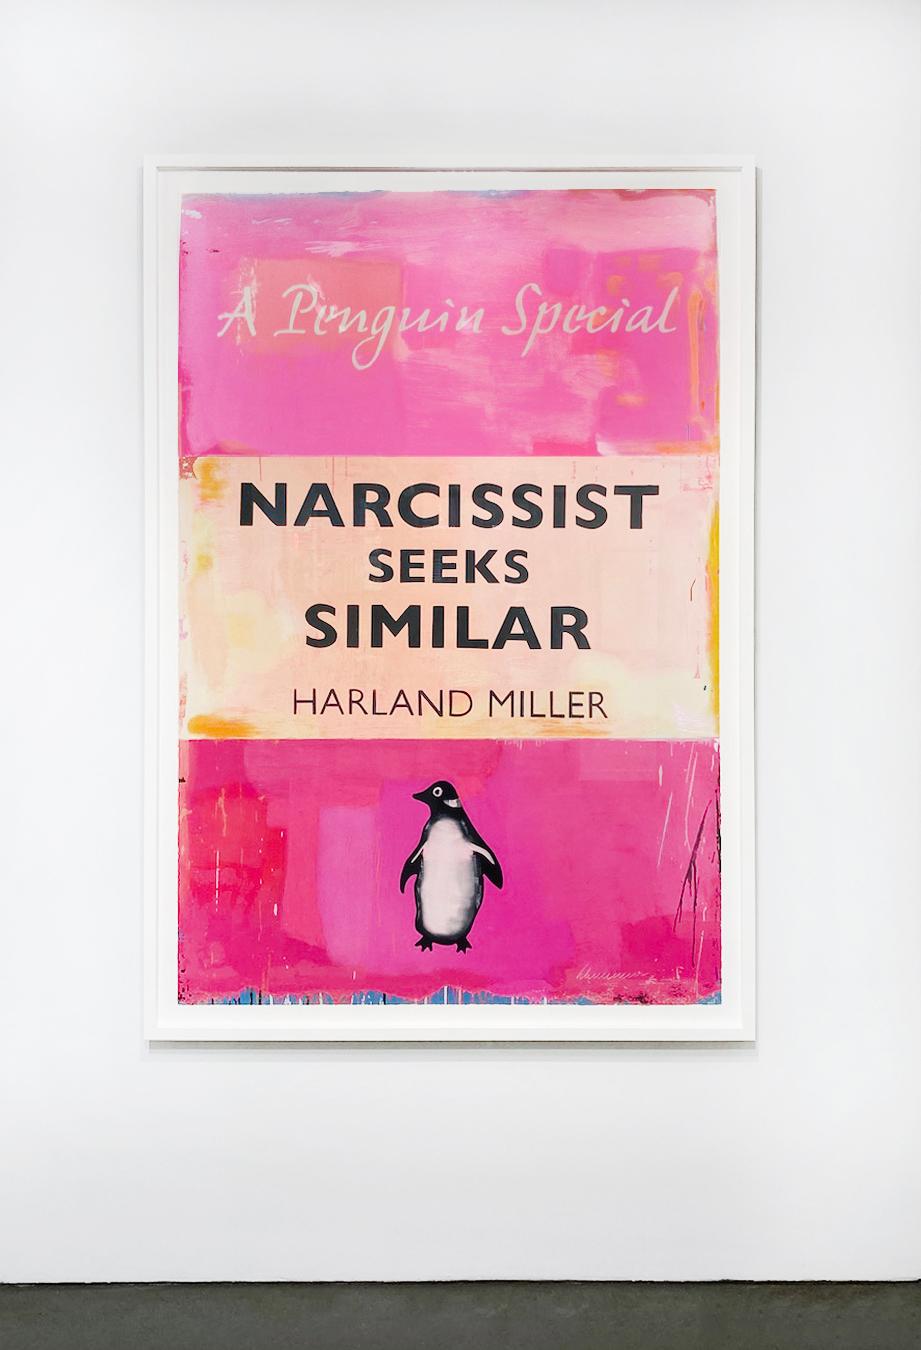 Narcissist Seeks Similar - Contemporary Print by Harland Miller